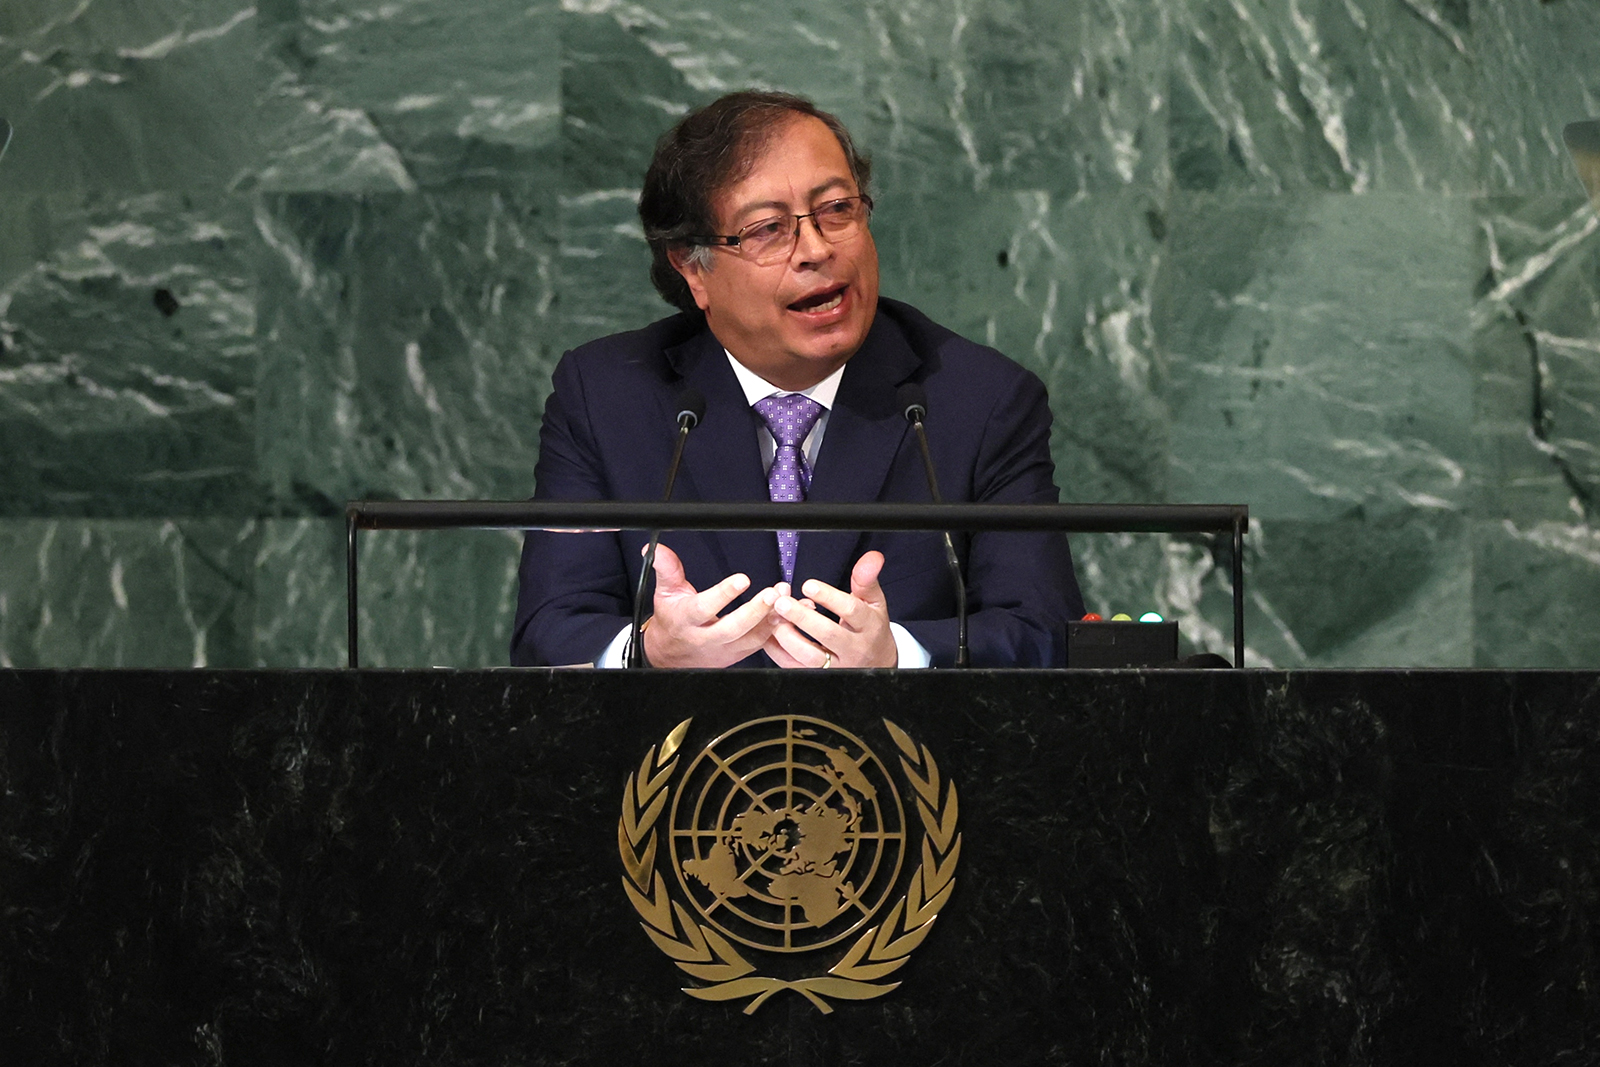 Colombia's President Gustavo Petro addresses the 77th Session of the United Nations General Assembly on Tuesday.